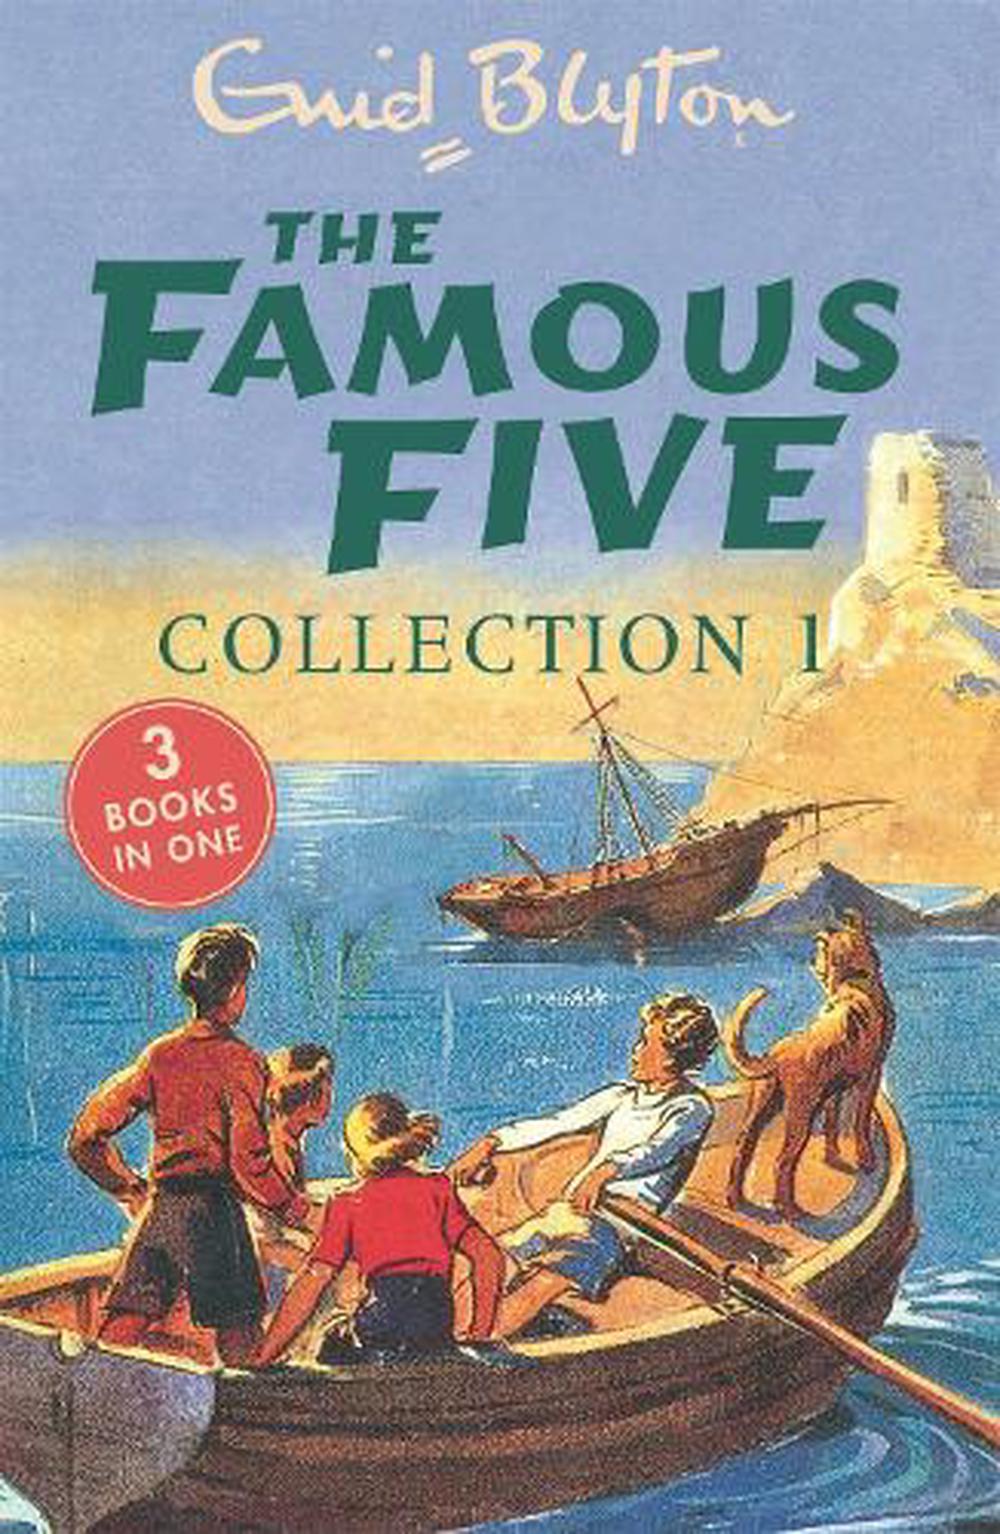 book review on famous five